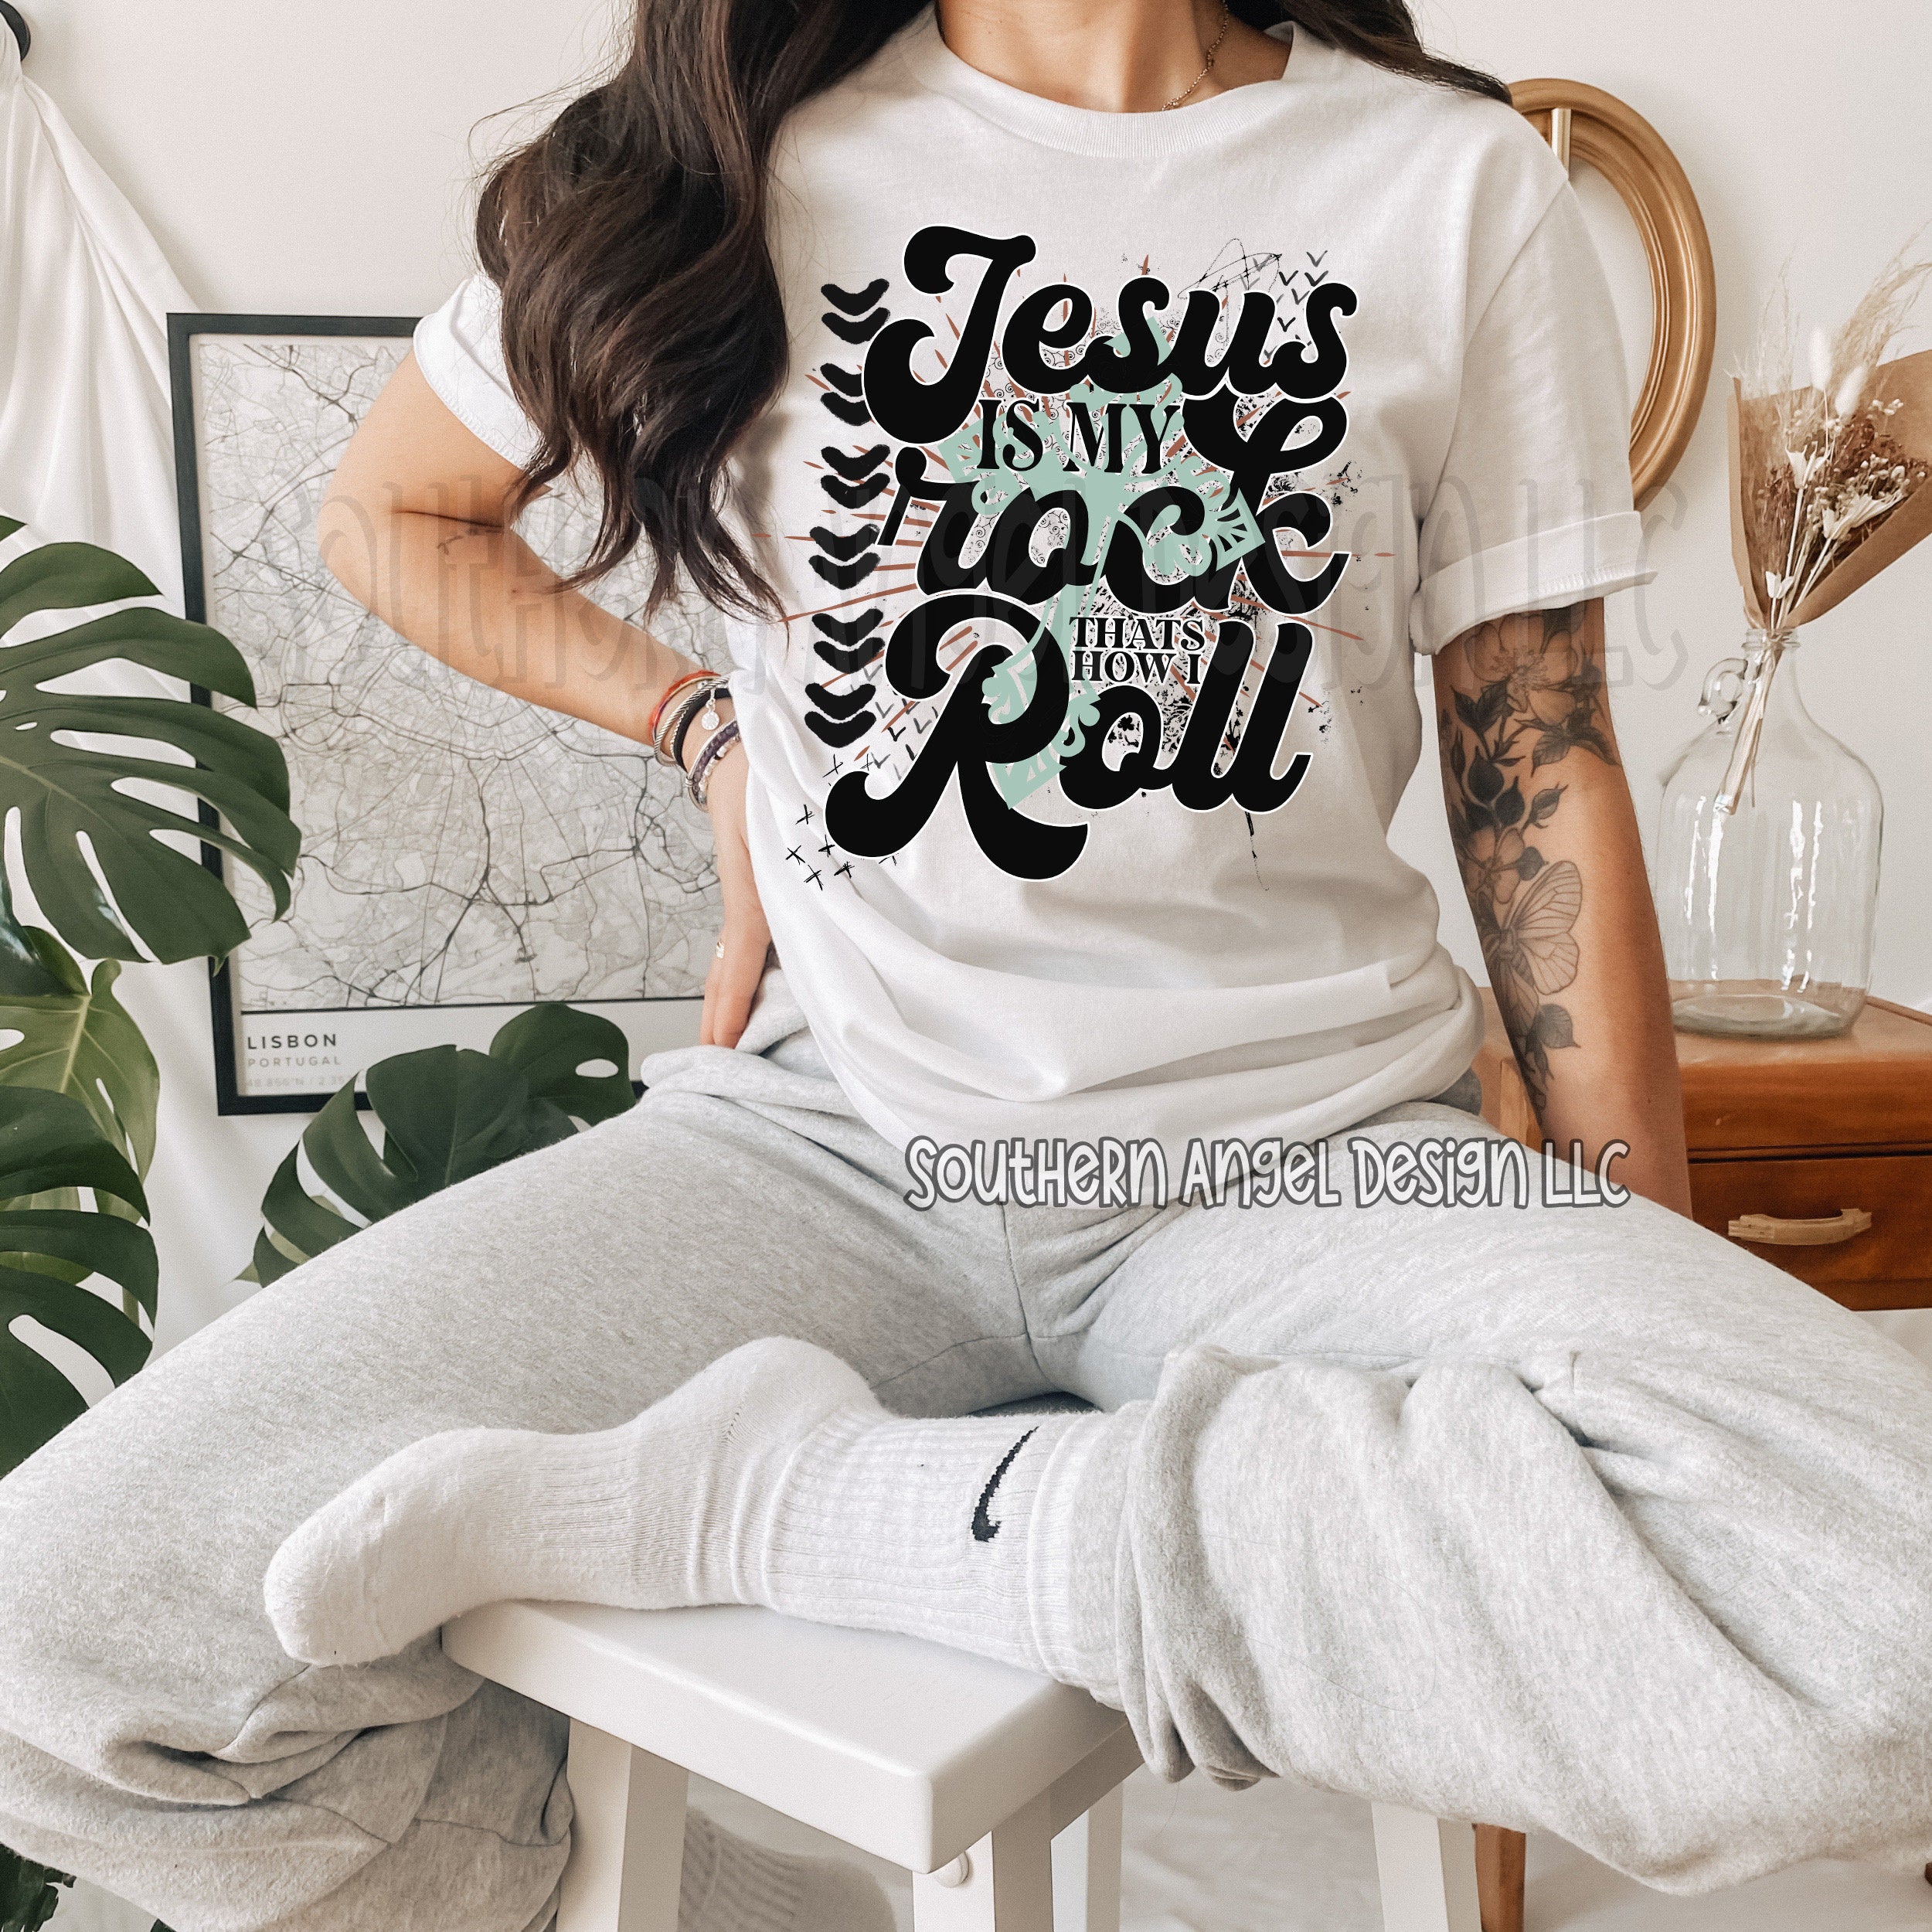 Jesus is my rock and that is how I roll shirt, Funny shirt, sarcastic shirt, Religious shirt, Leave the judging to Jesus, Love like Jesus